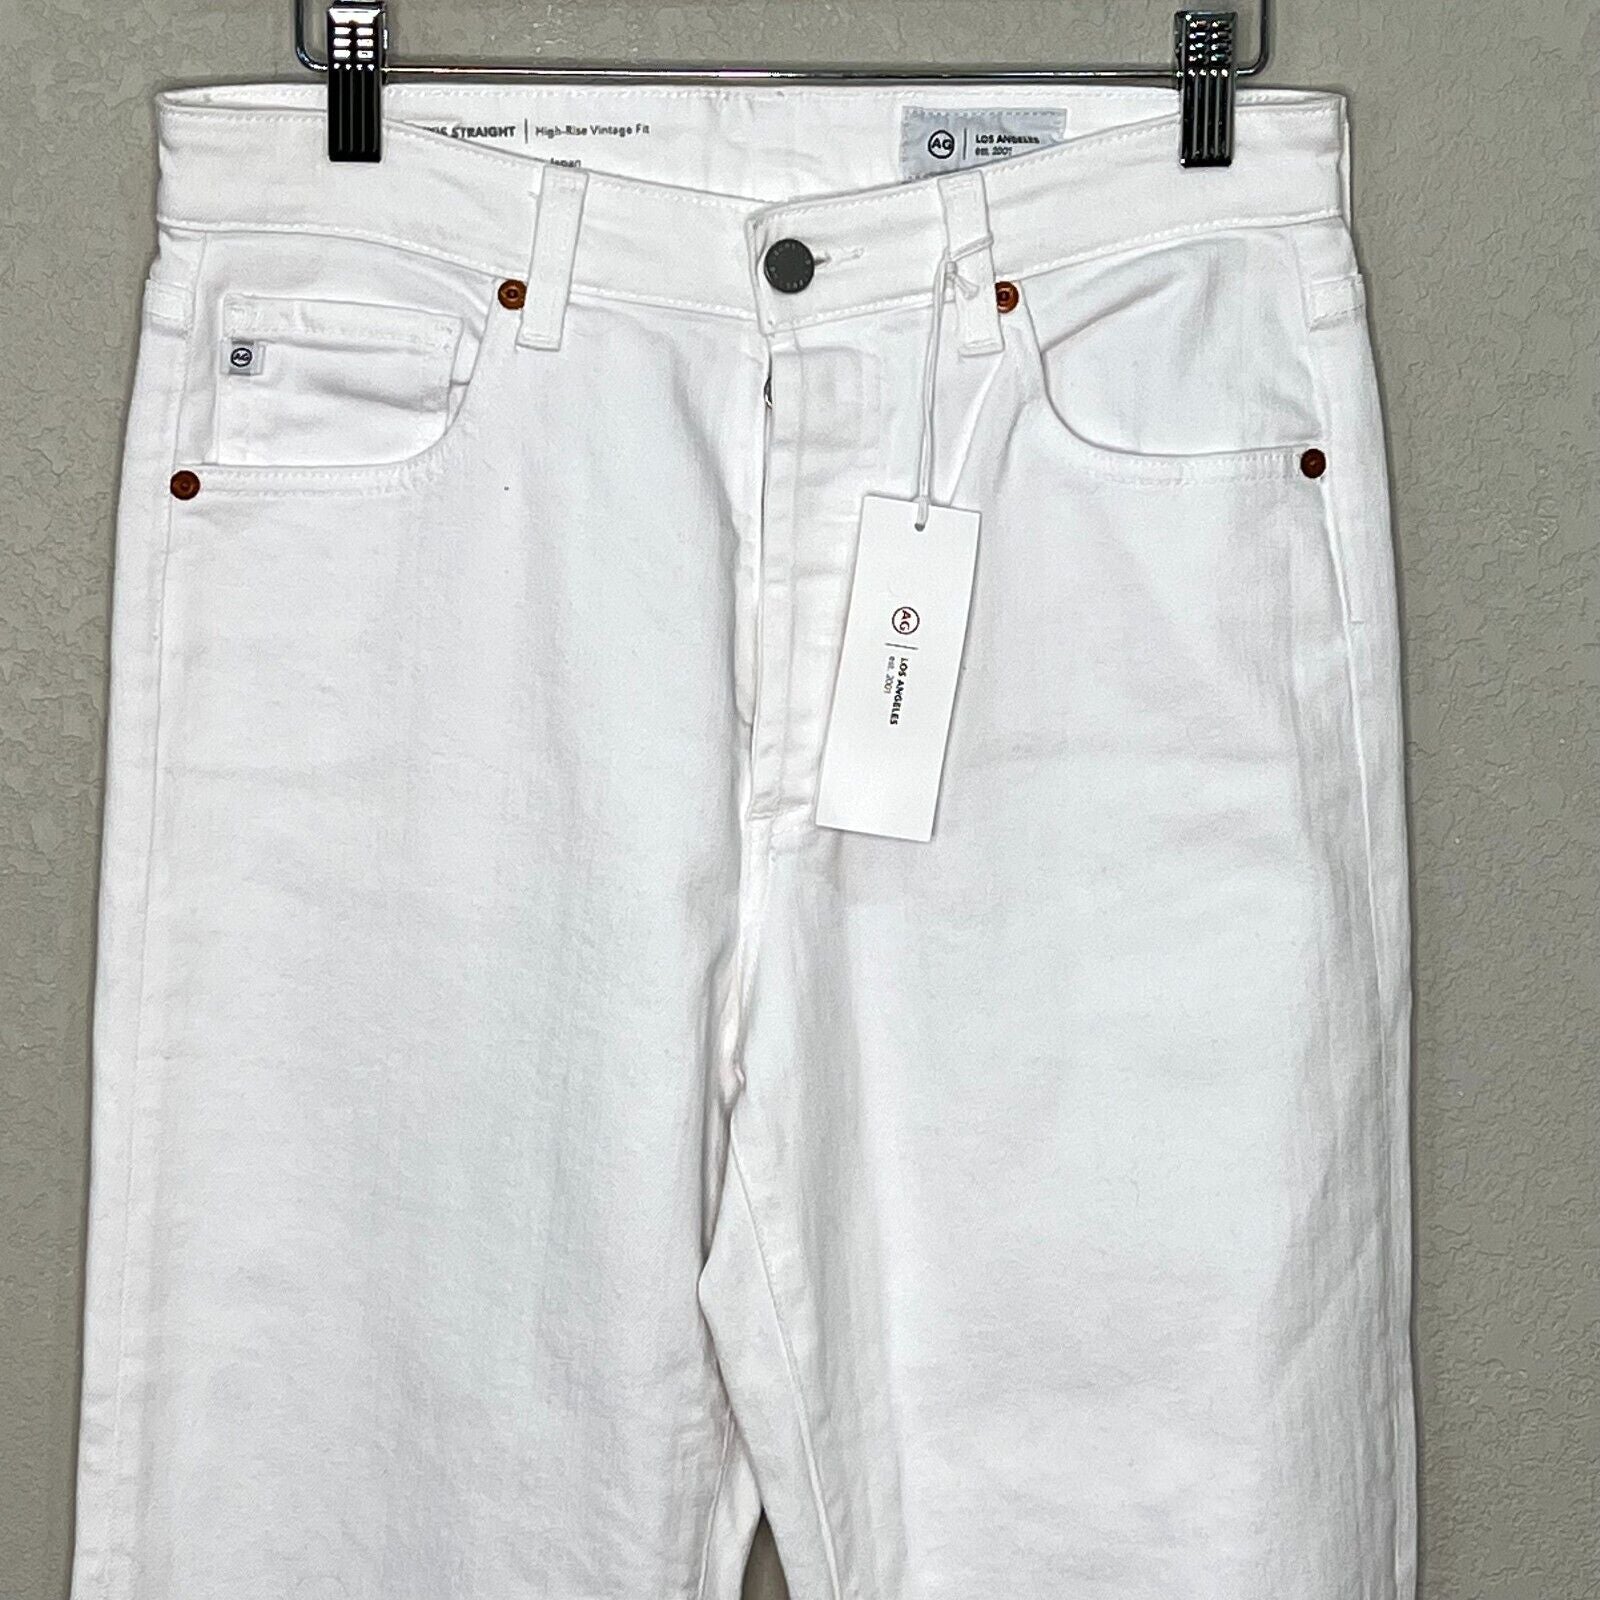 Adriano Goldschmied AG The Alexxis White Straight Jeans Size 29 NEW $215